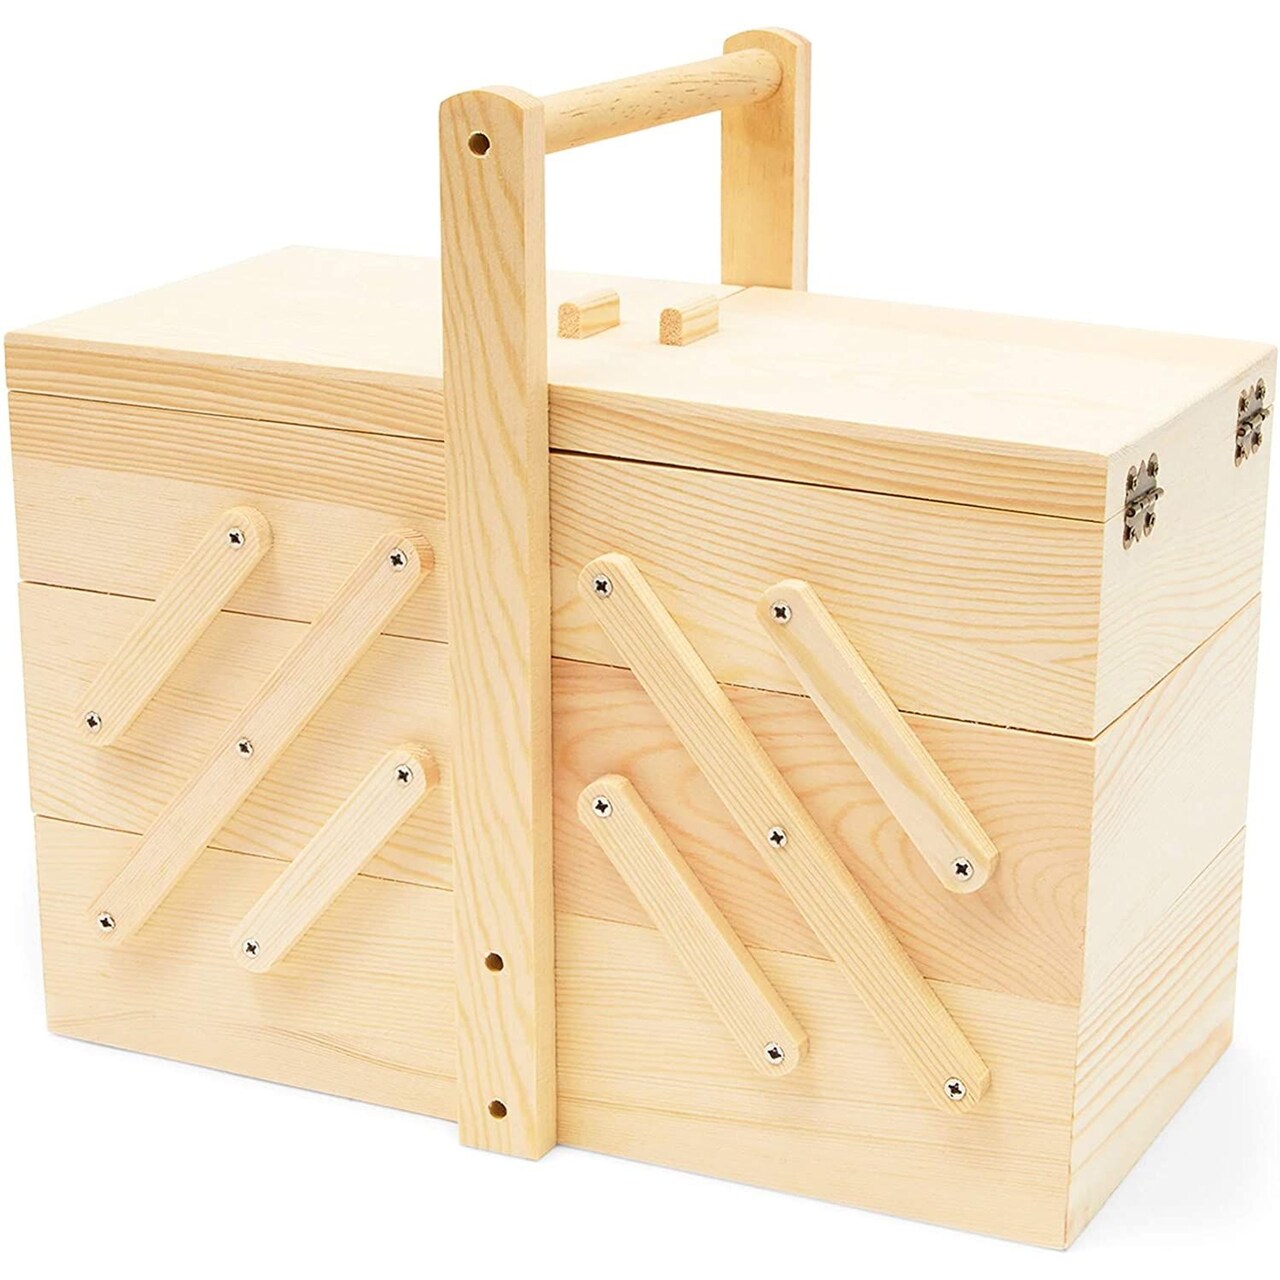 Wooden Sewing Box Organizer for Sewing Supplies with 3 Tier